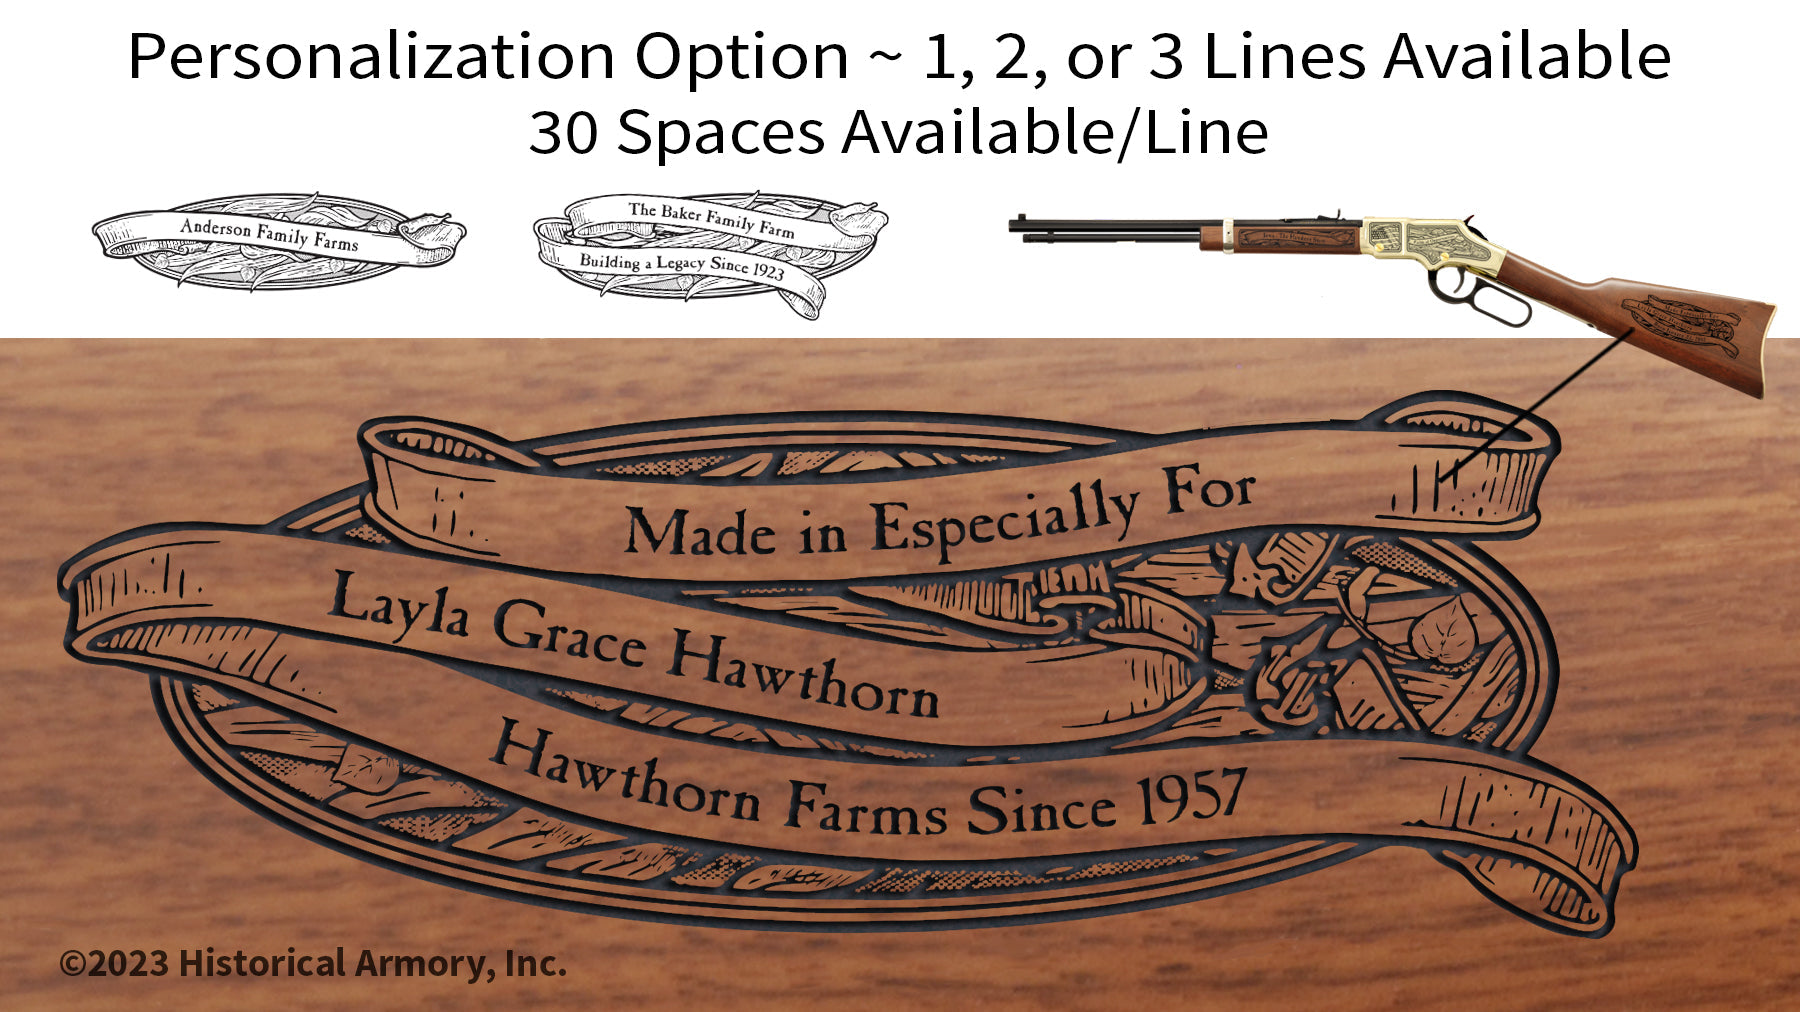 Montana Agricultural Heritage Engraved Rifle Personalization